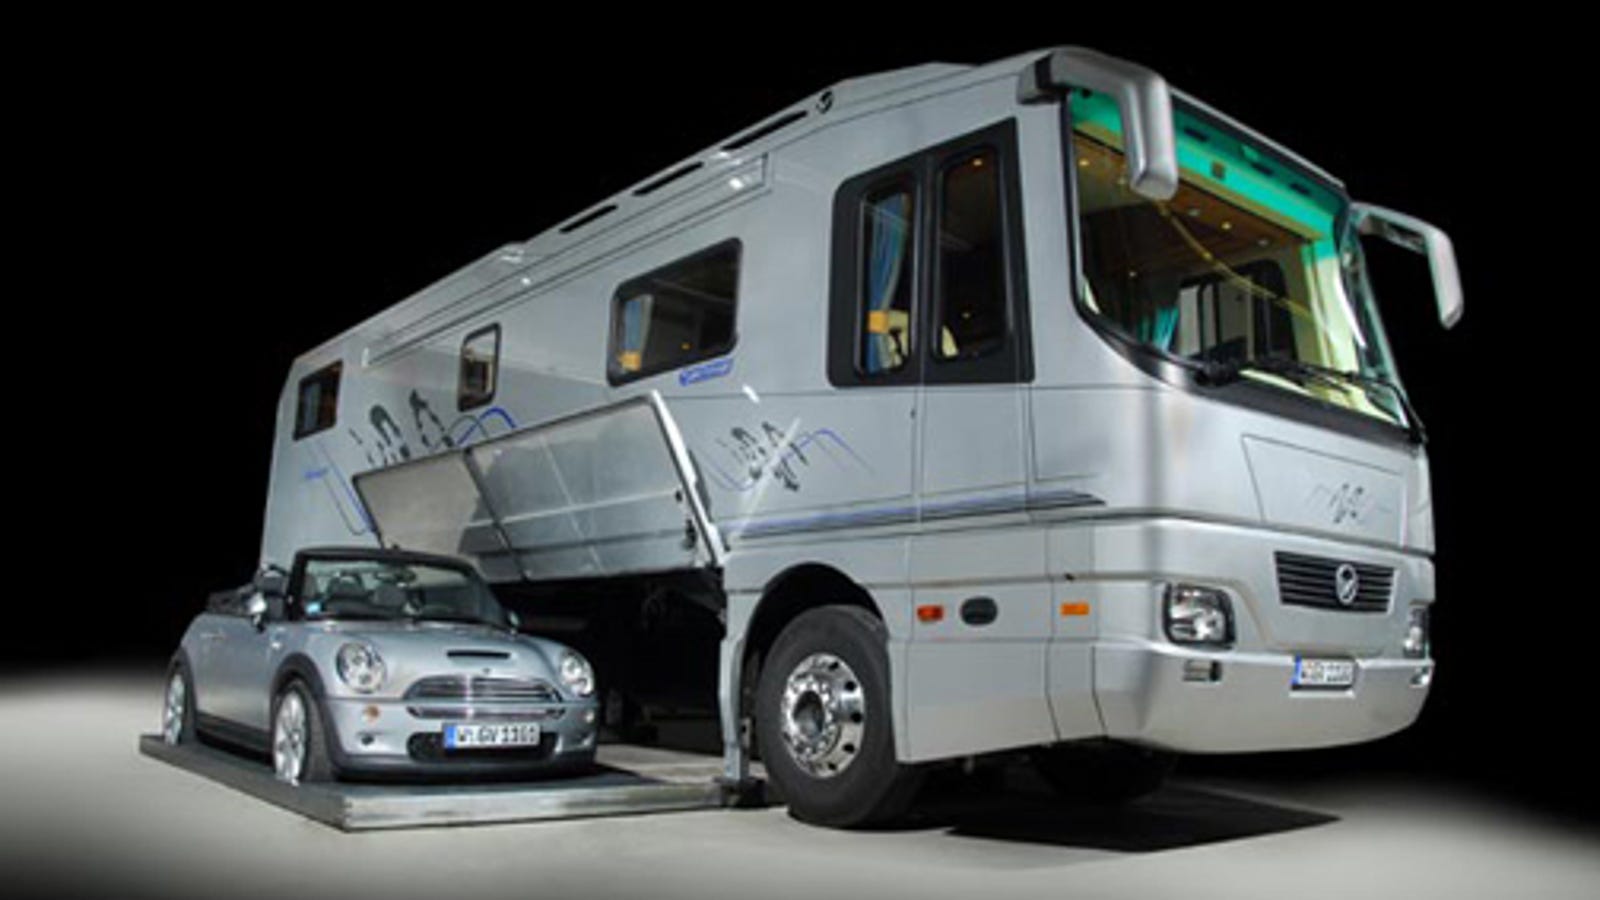 Volkner Mobil Car-Carrying Motor Home Could Be Yours For $1.2 Million